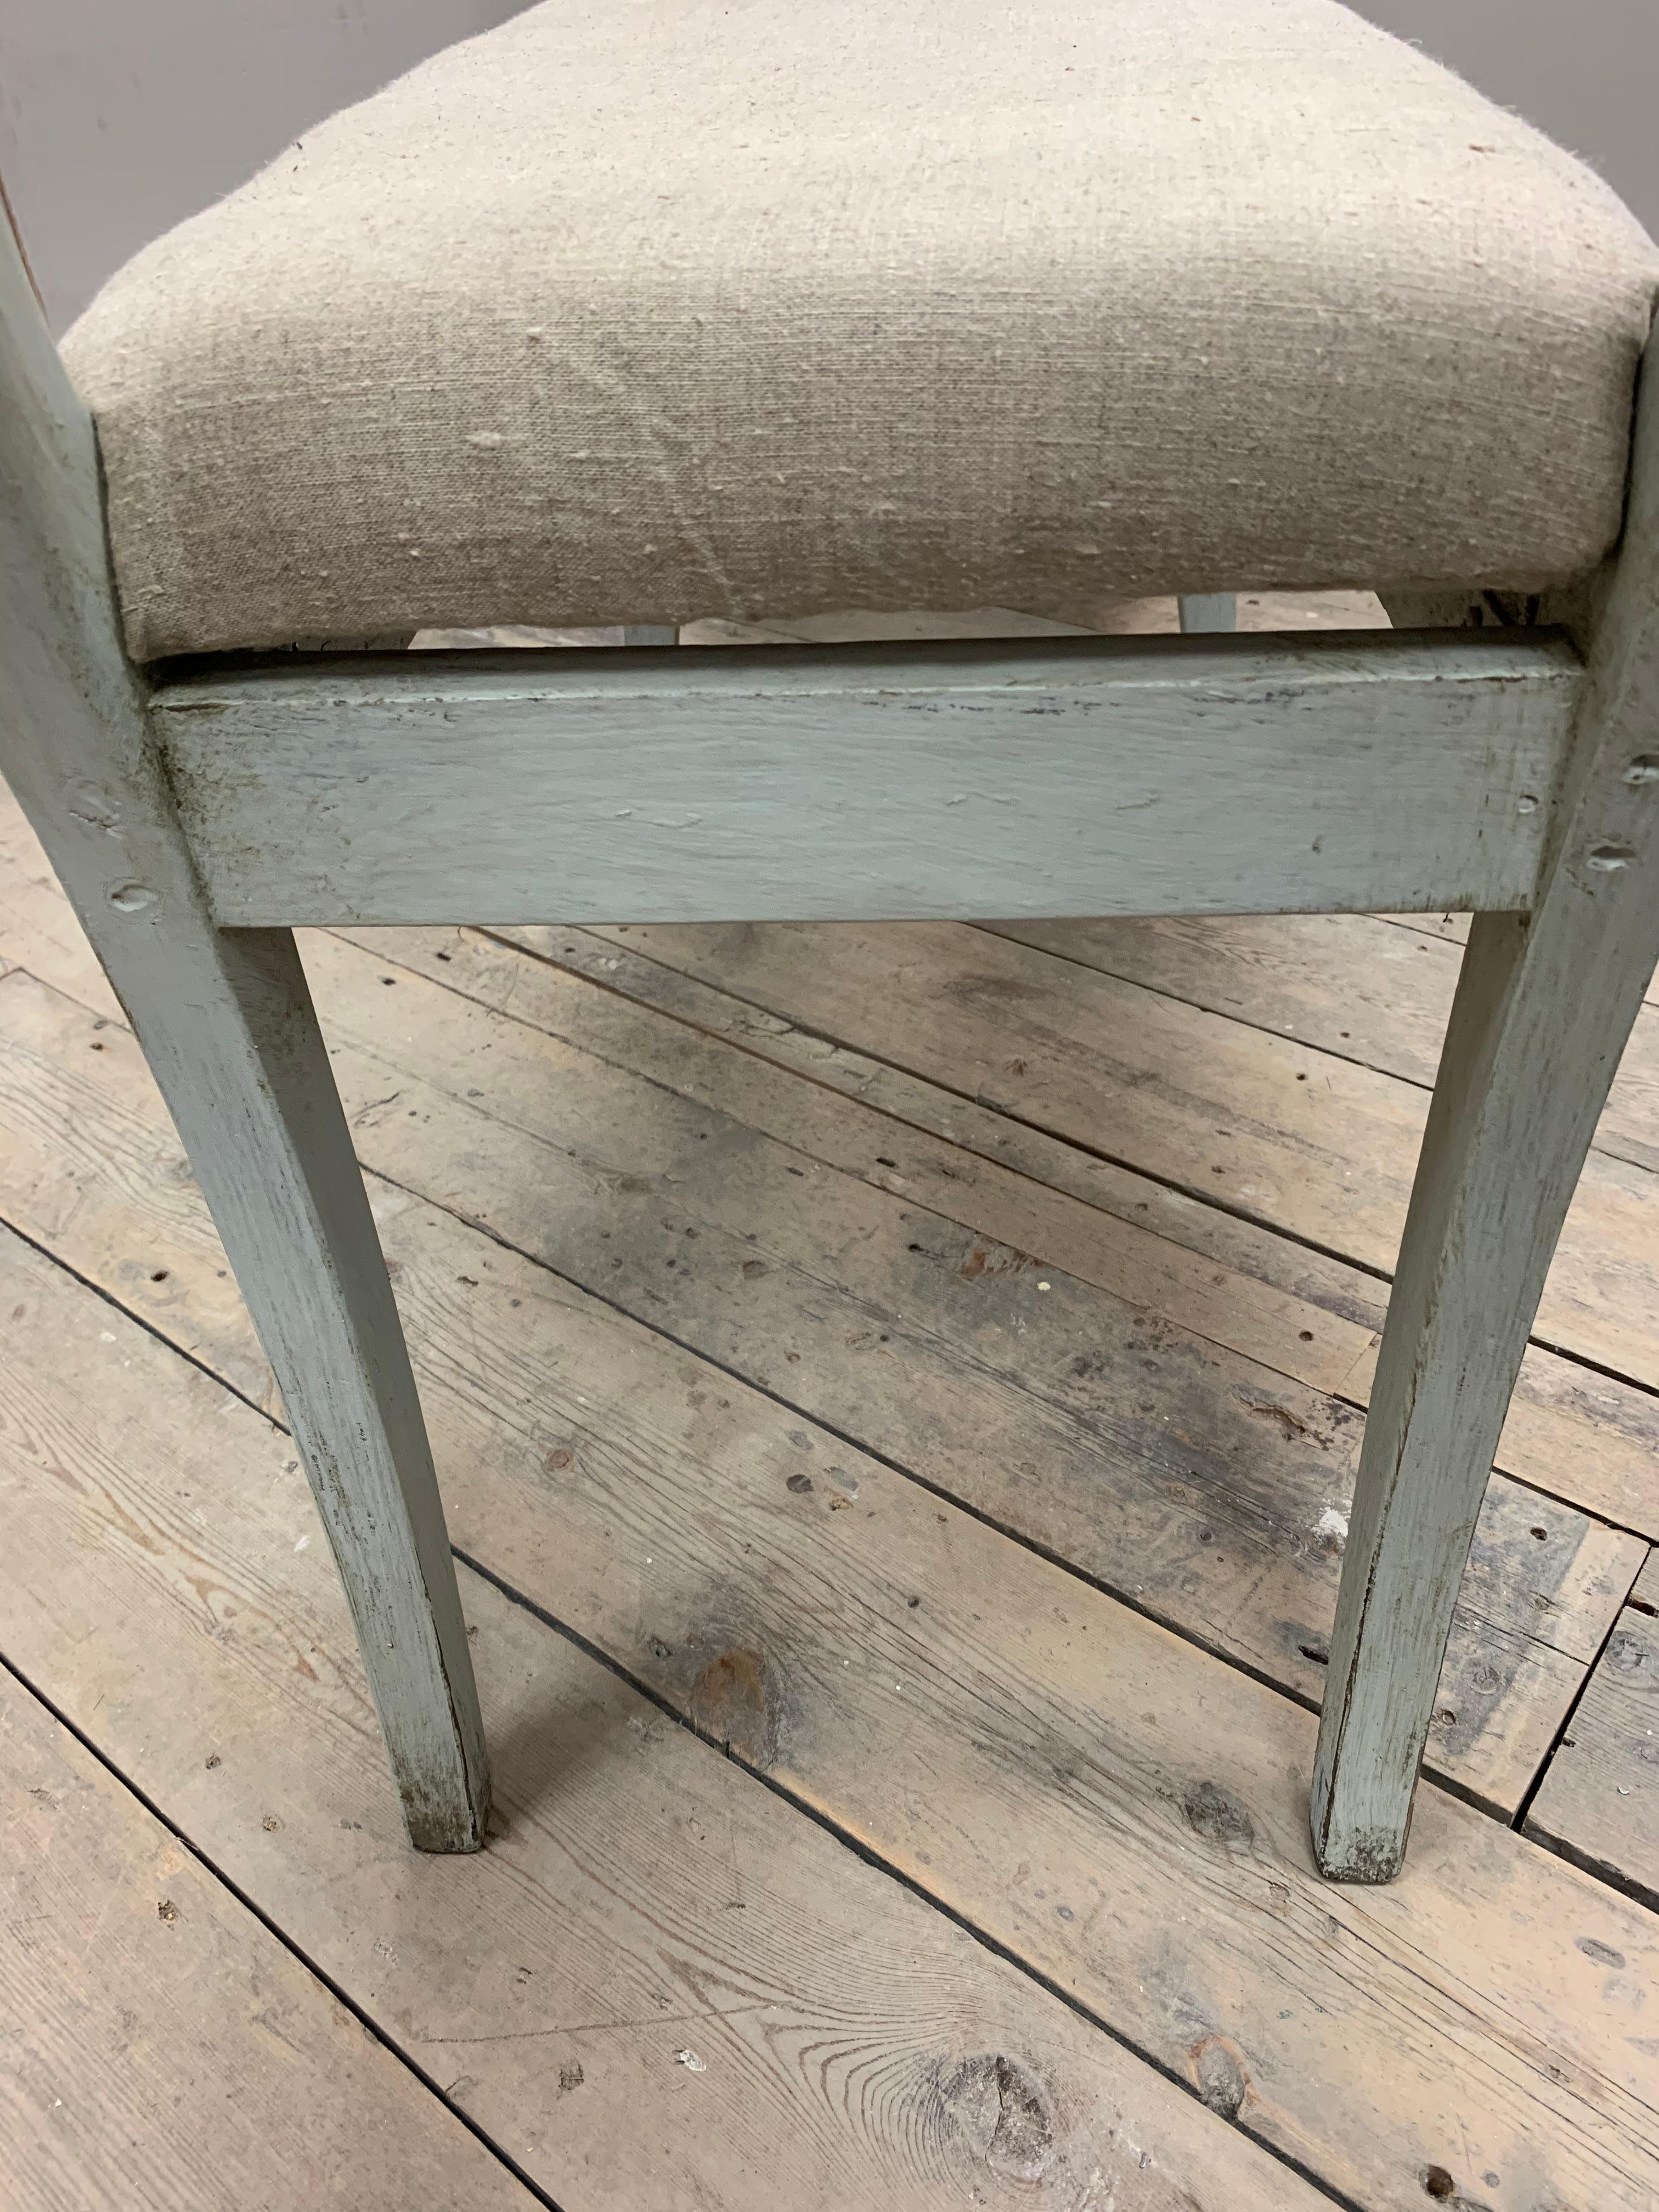 Circa 1900 Painted Pale Green/Blue Swedish Bench with an Upholstered Seat 3